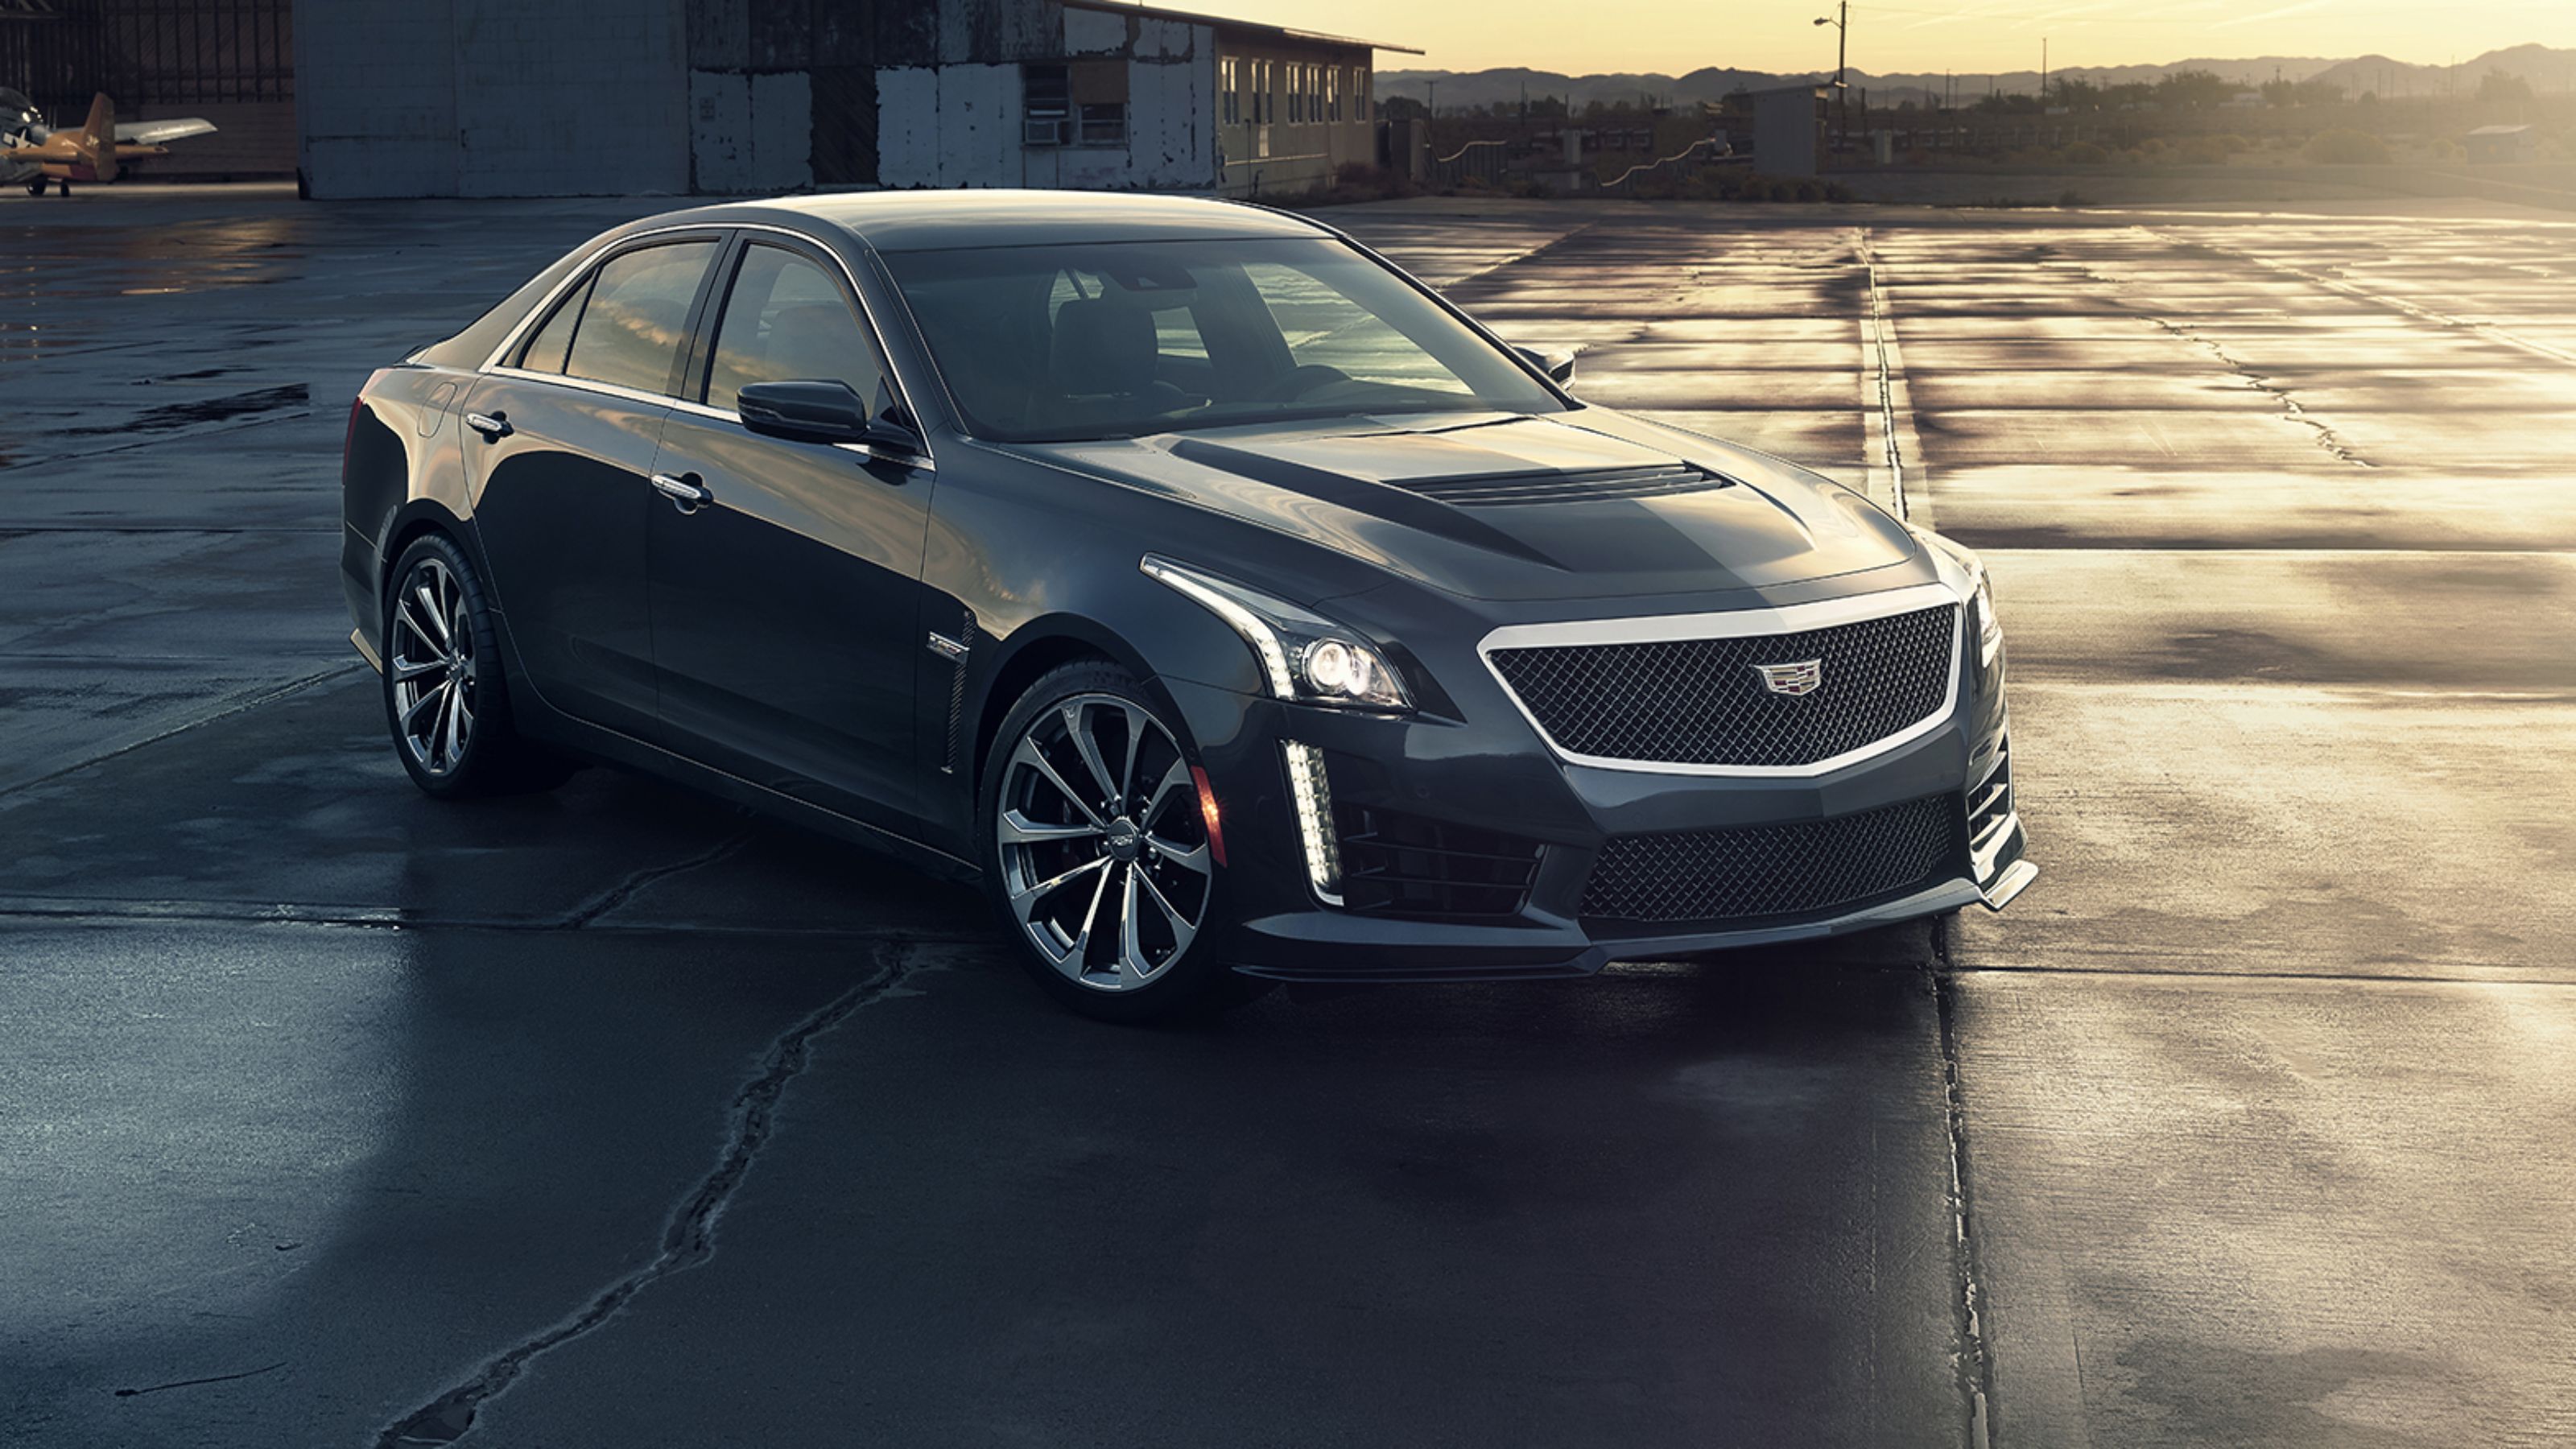 Cadillac Cts V Black Car Side View 750x1334 Iphone 8 7 6 6s Wallpaper Background Picture Image